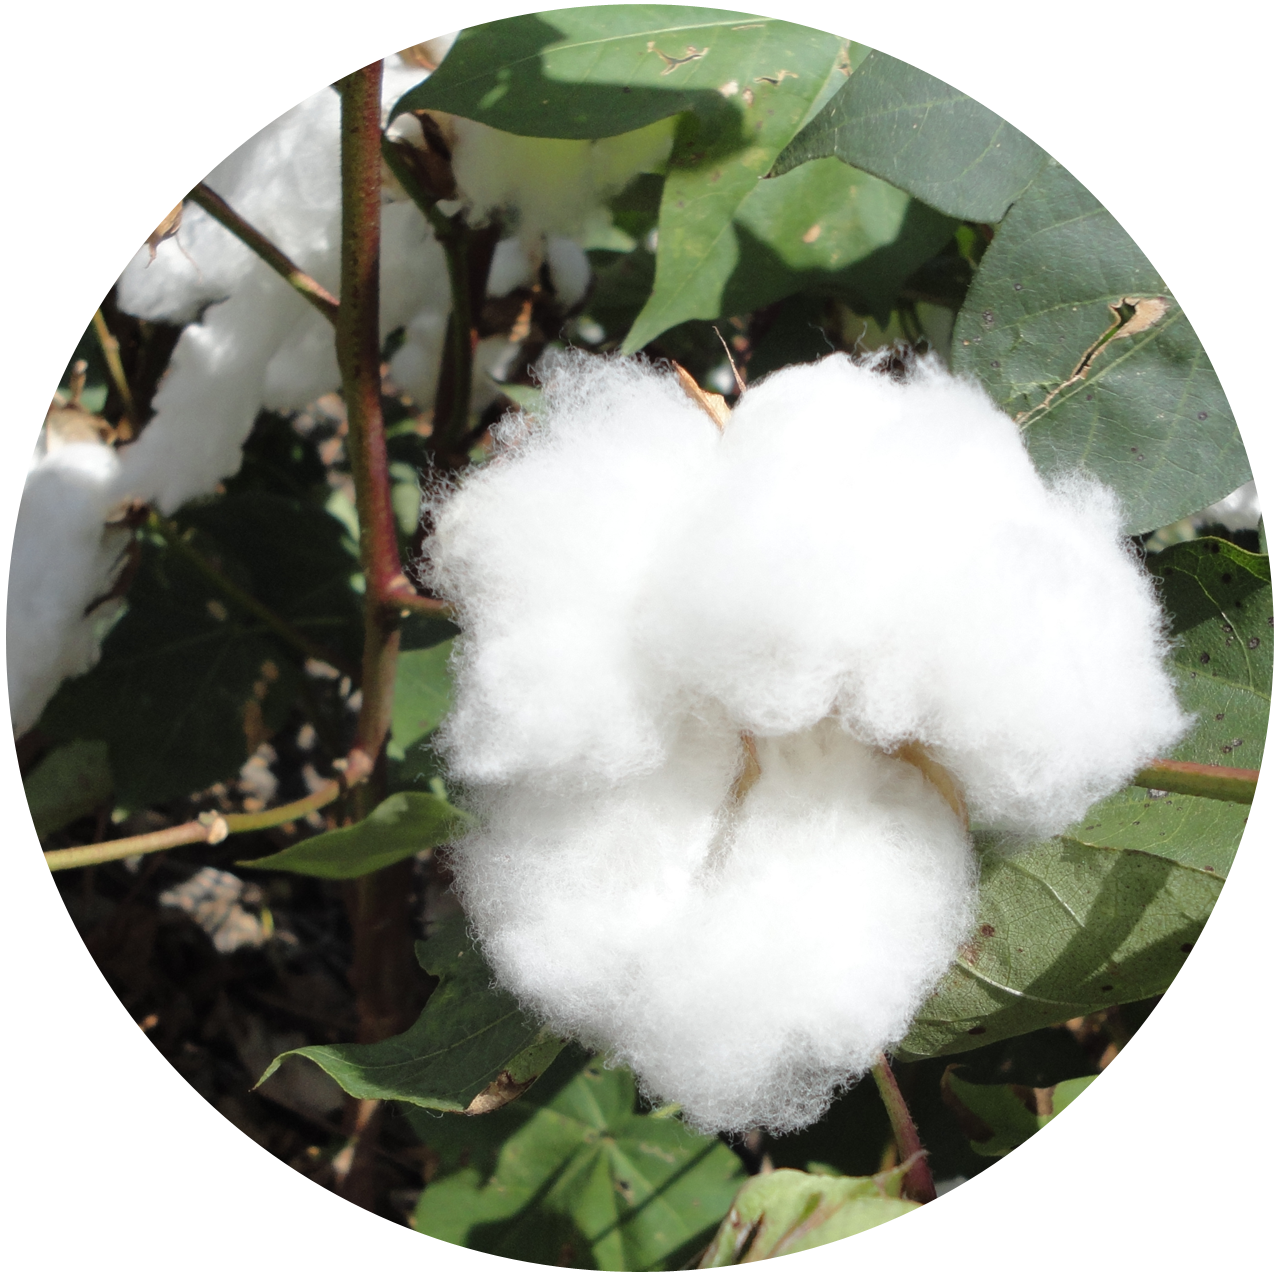 Cotton, Gossypium sp. A cotton boll of white fibers within a seed pod.